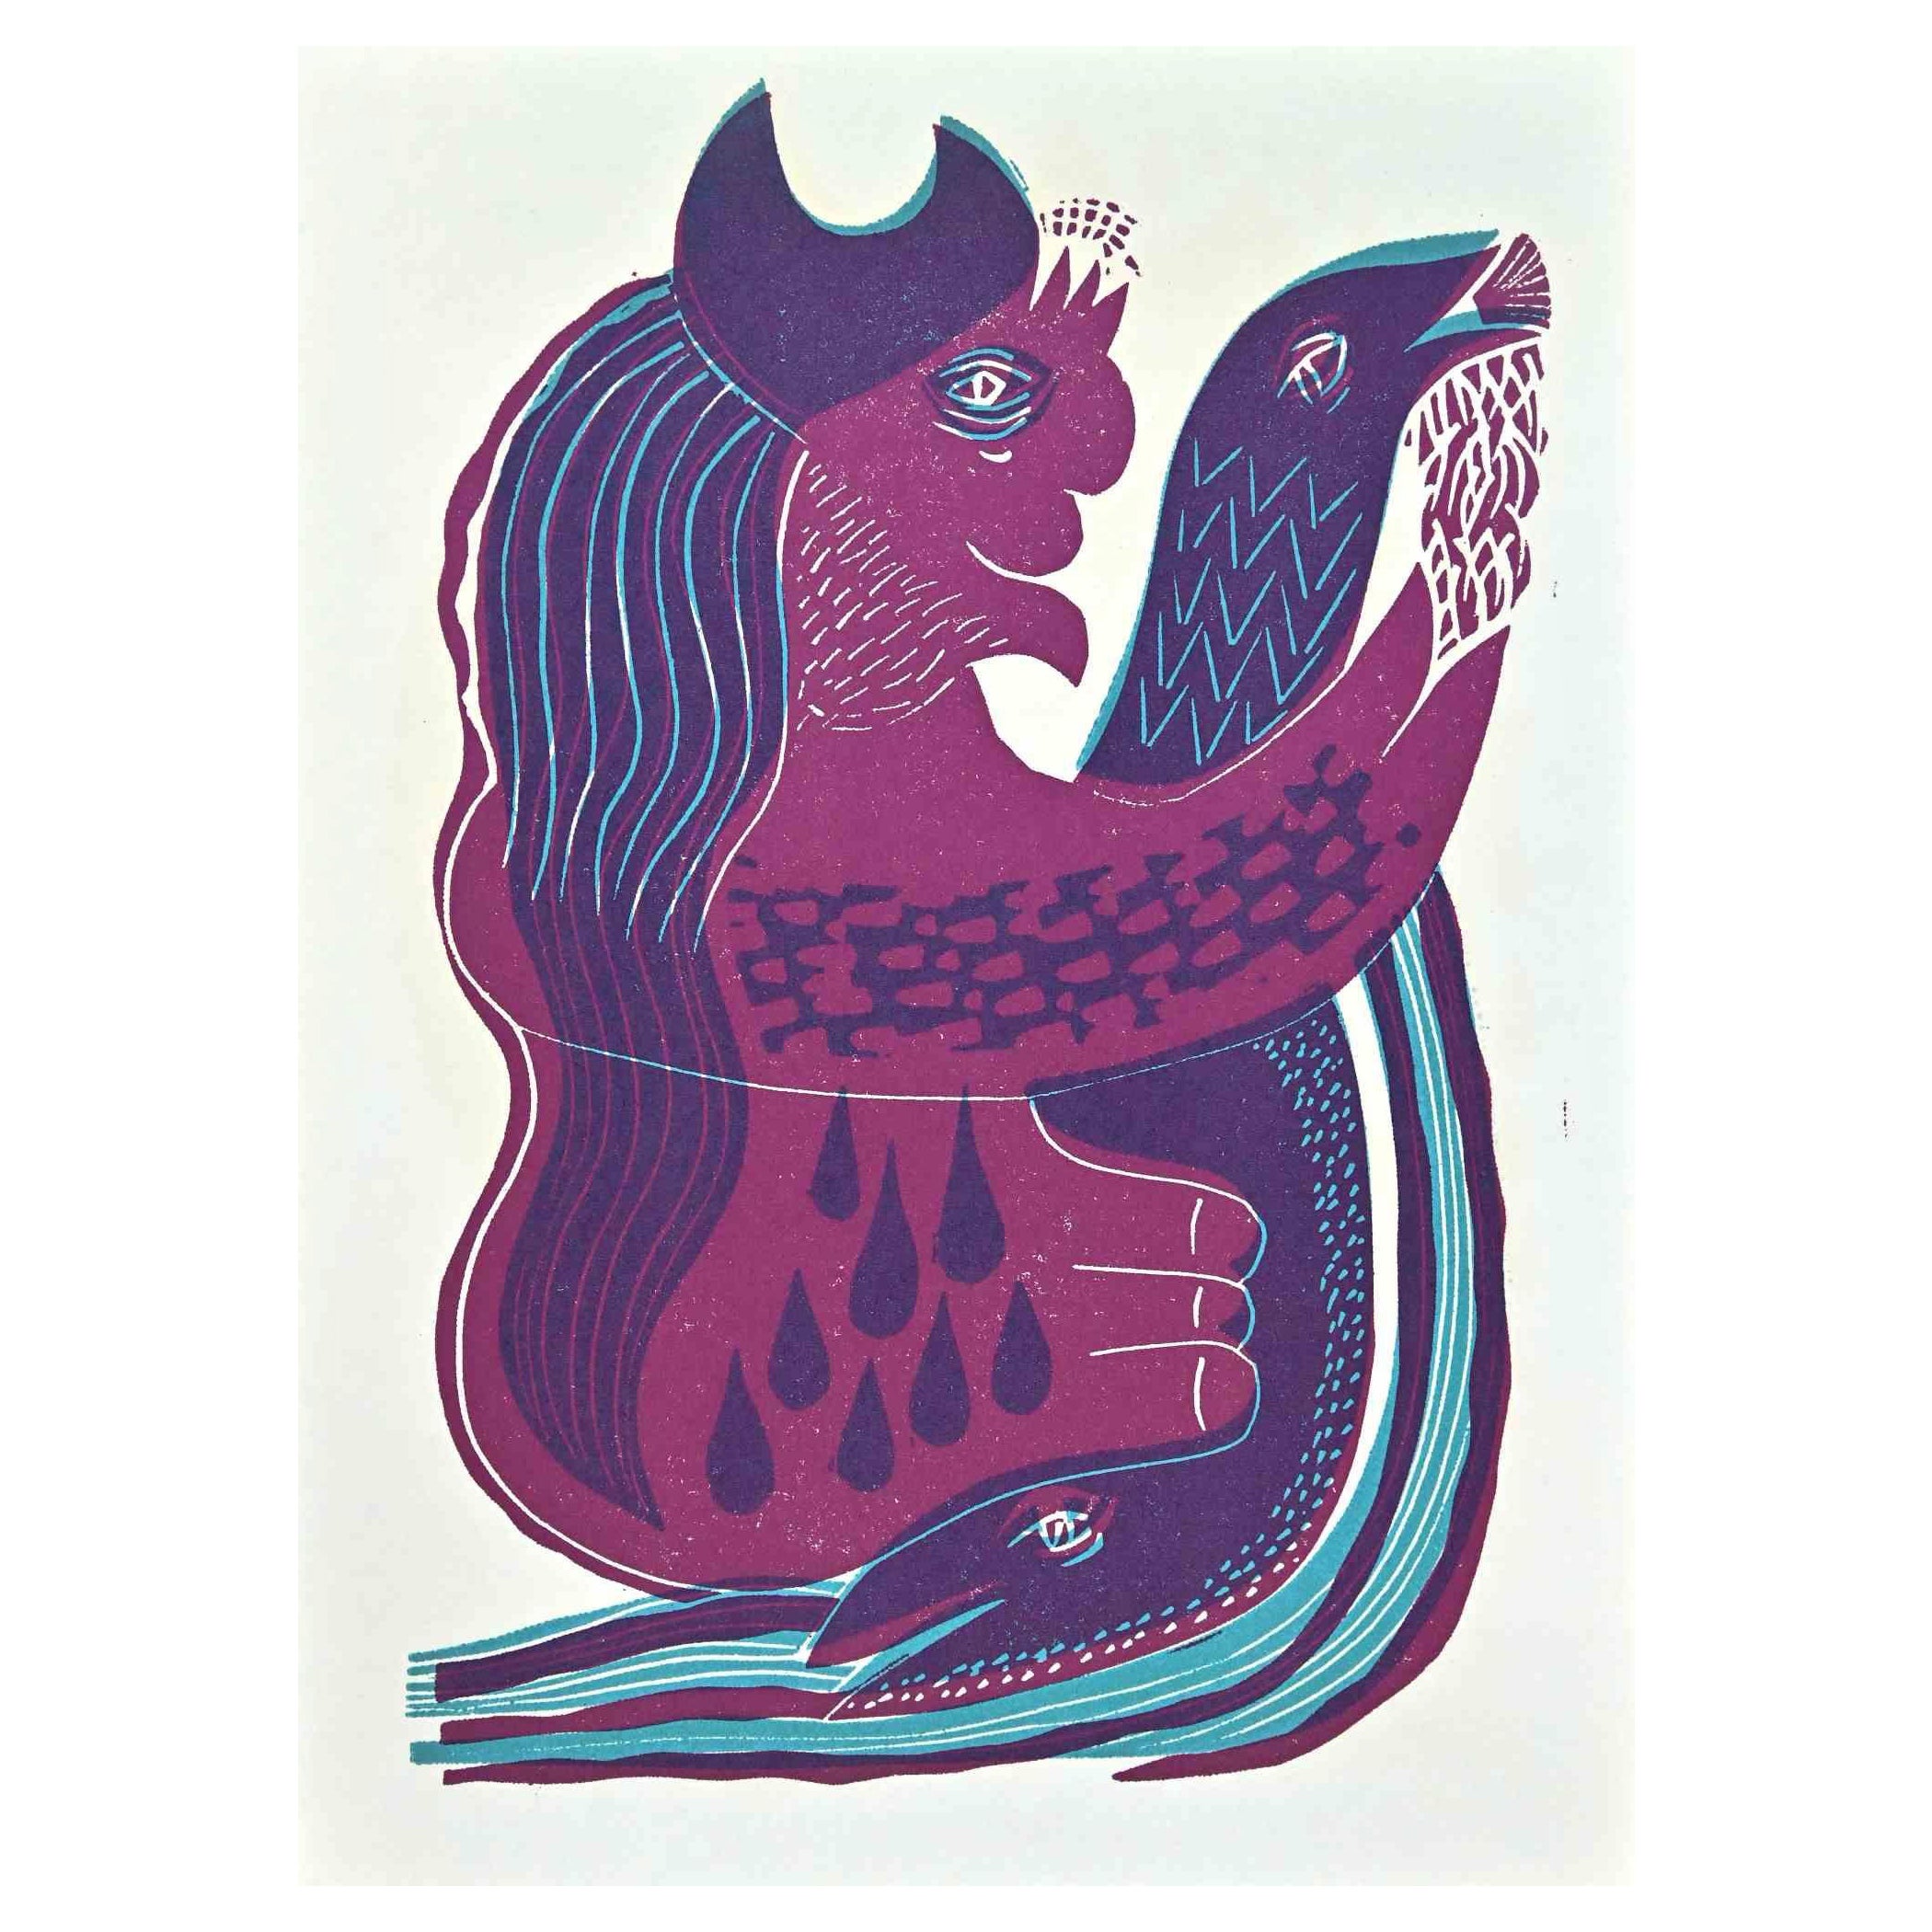 Creatures - Screen Print by Axel Hartenstein - Mid 20th century